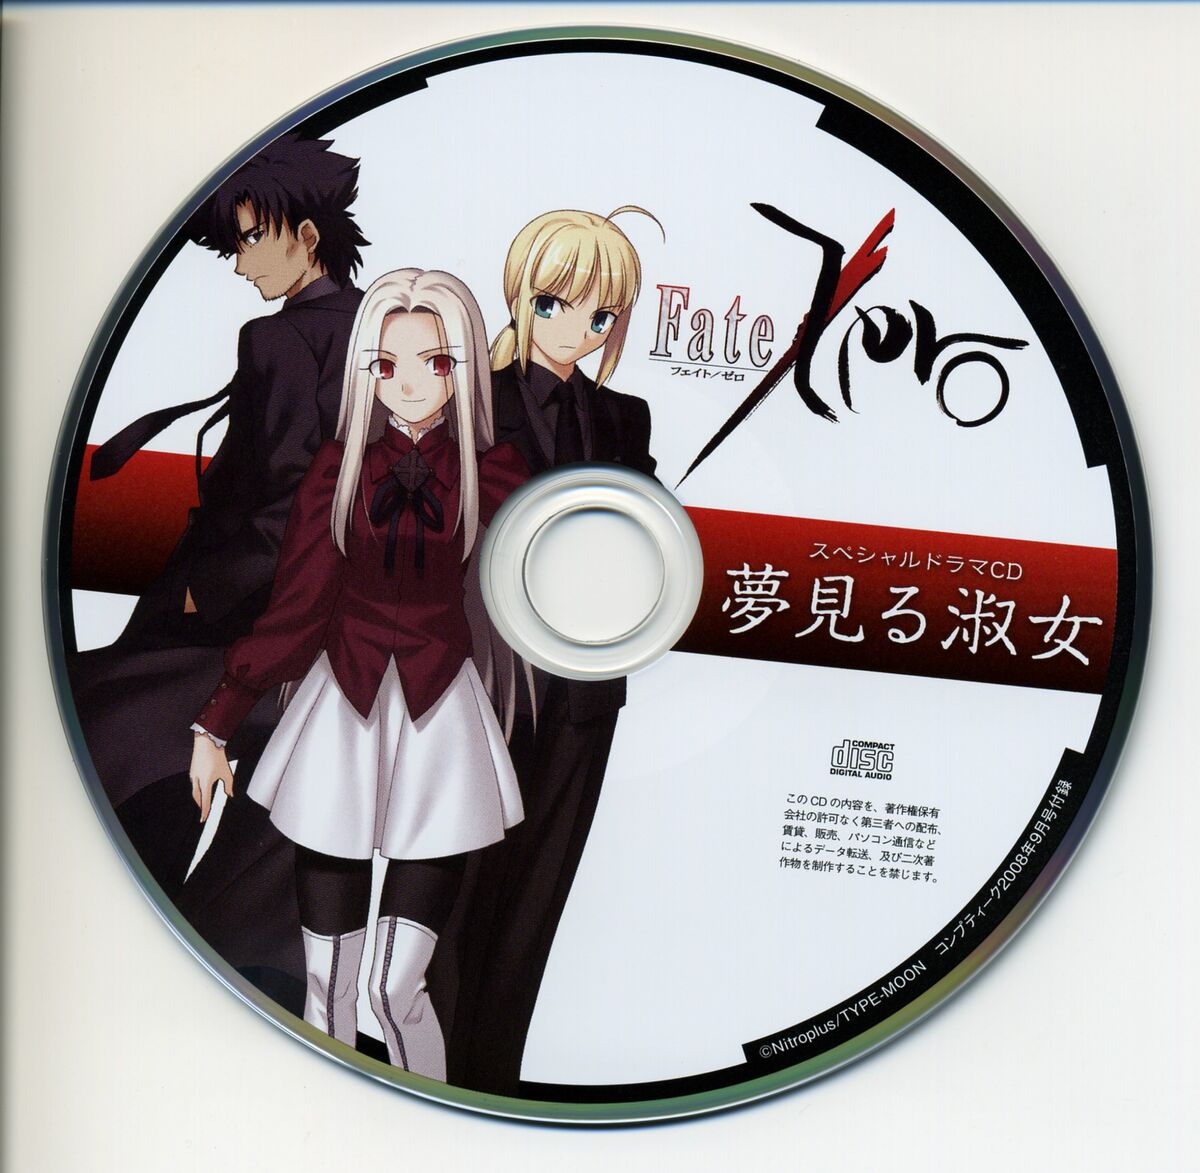 Fate/Zero Special Drama CD - Dreaming Lady | TYPE-MOON Wiki